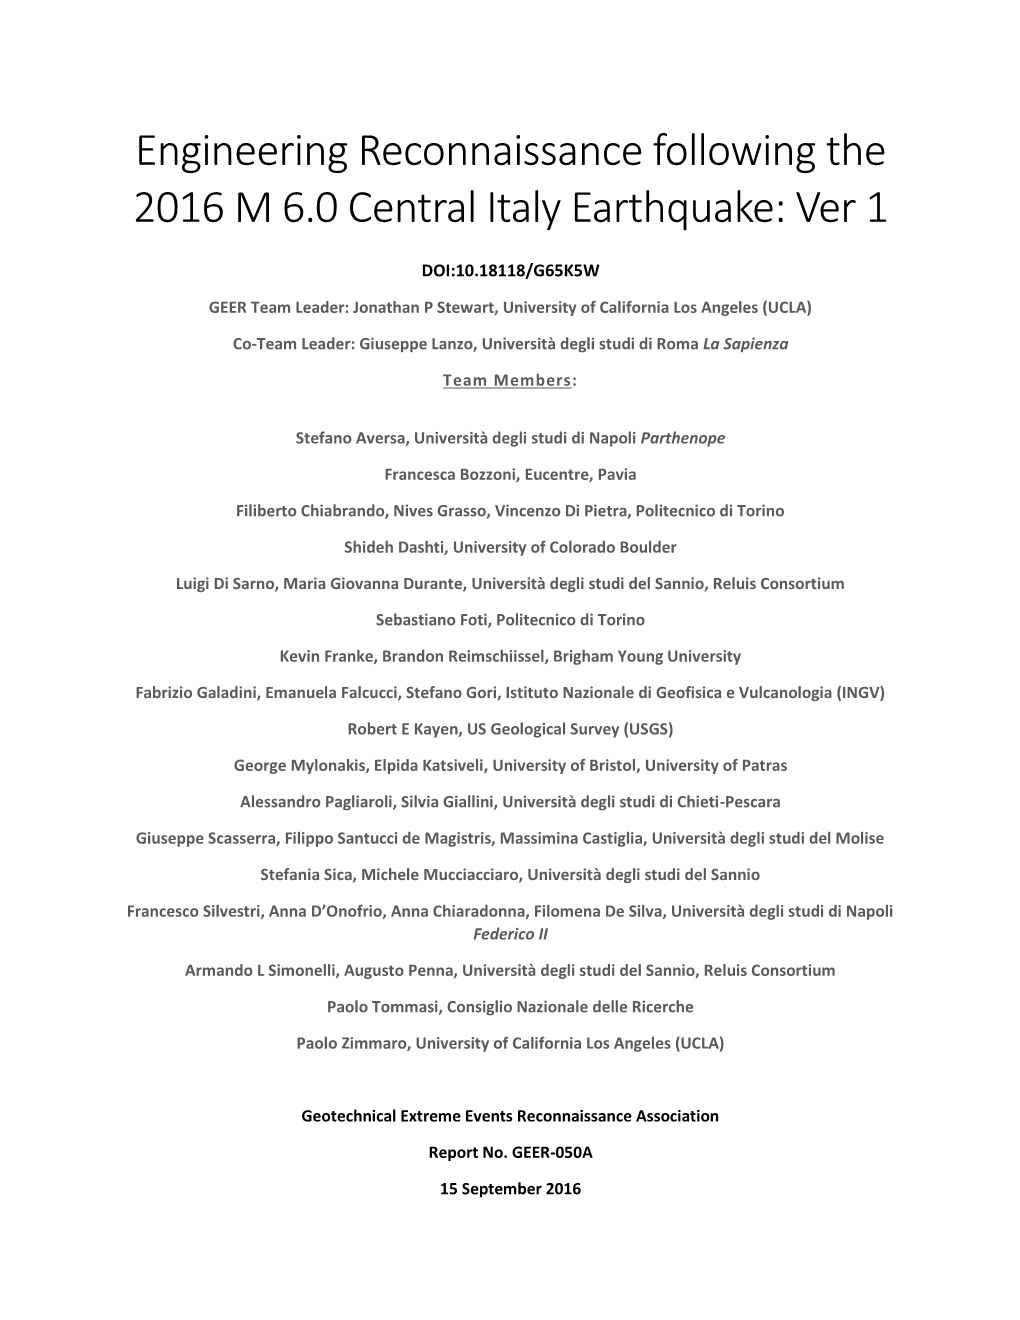 Engineering Reconnaissance Following the 2016 M 6.0 Central Italy Earthquake: Ver 1